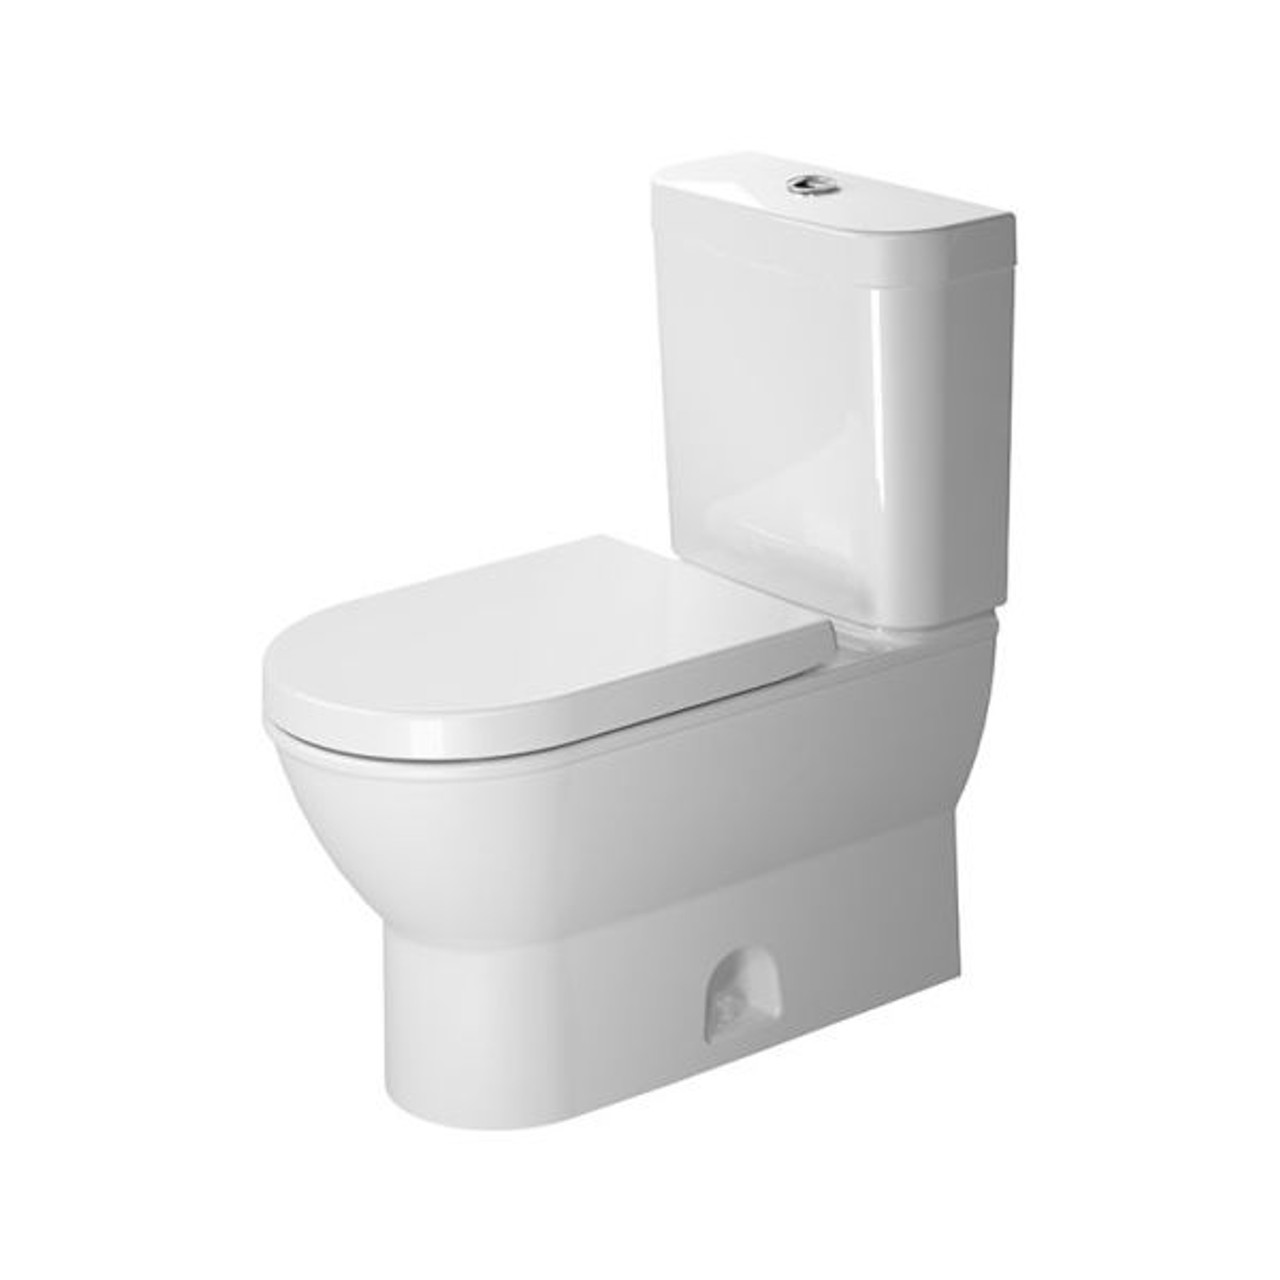 Duravit 212601 Darling New Two Piece Toilet Without Tank York Taps